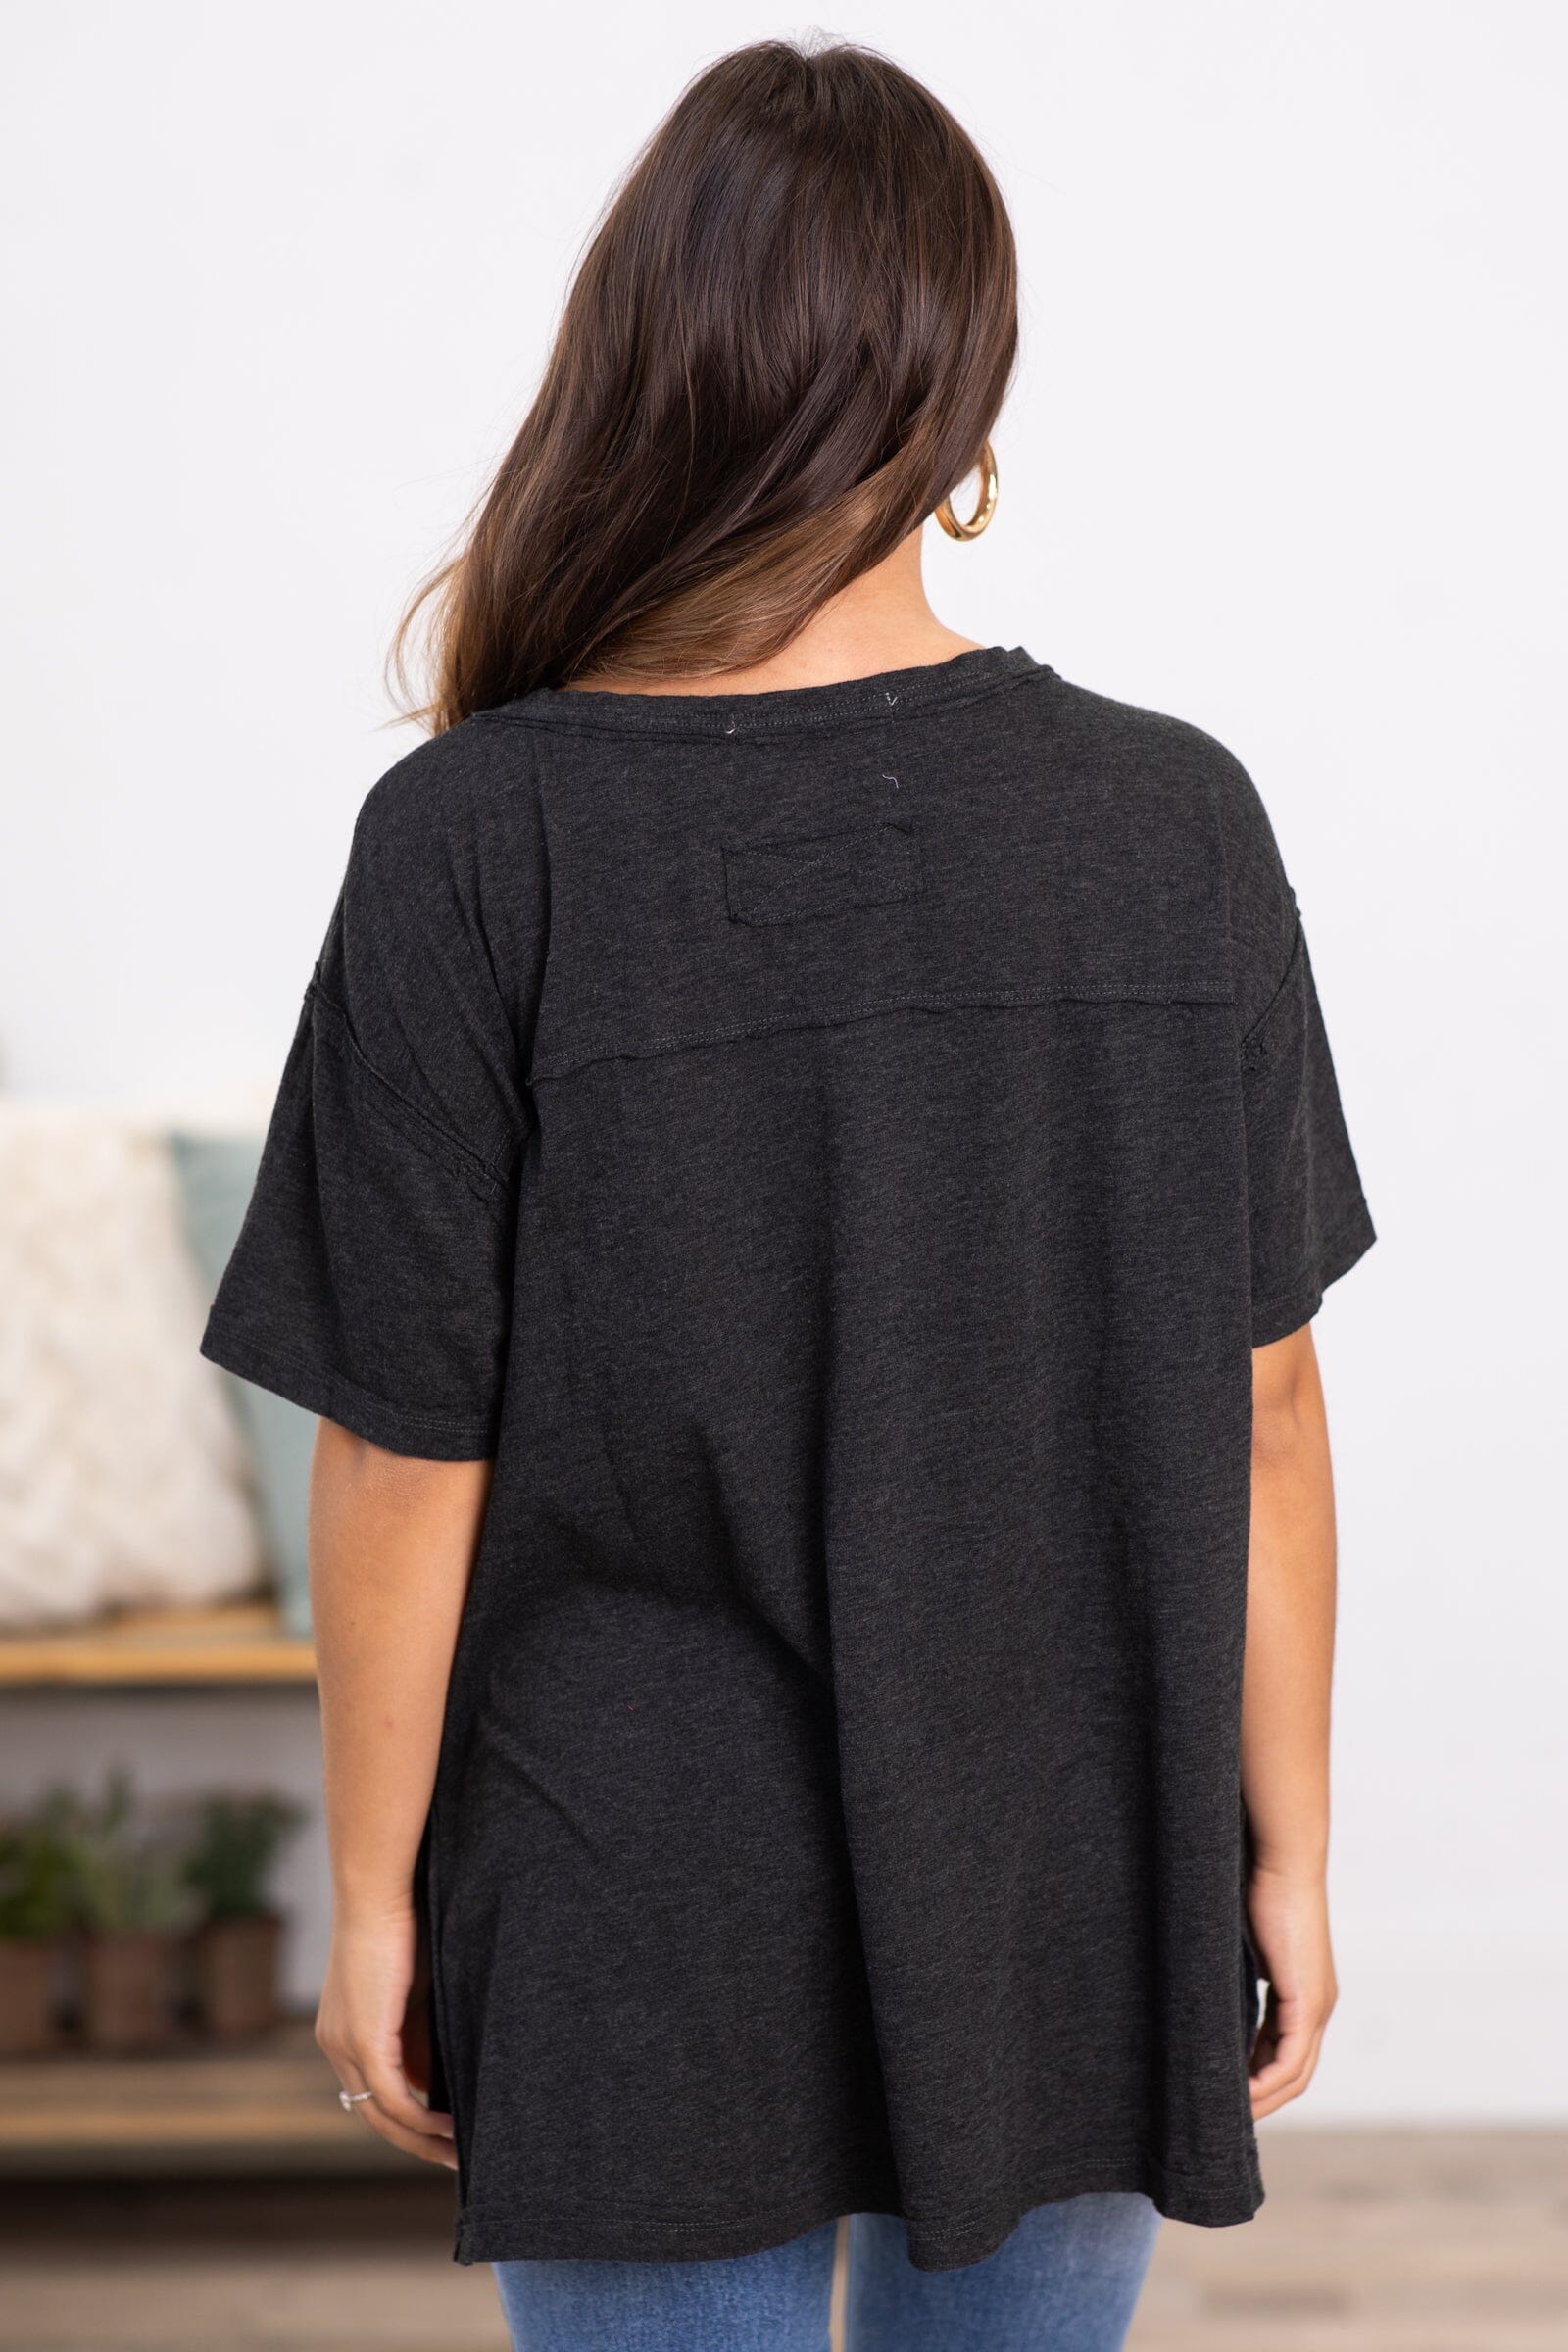 Charcoal Washed Top With Side Slits - Filly Flair